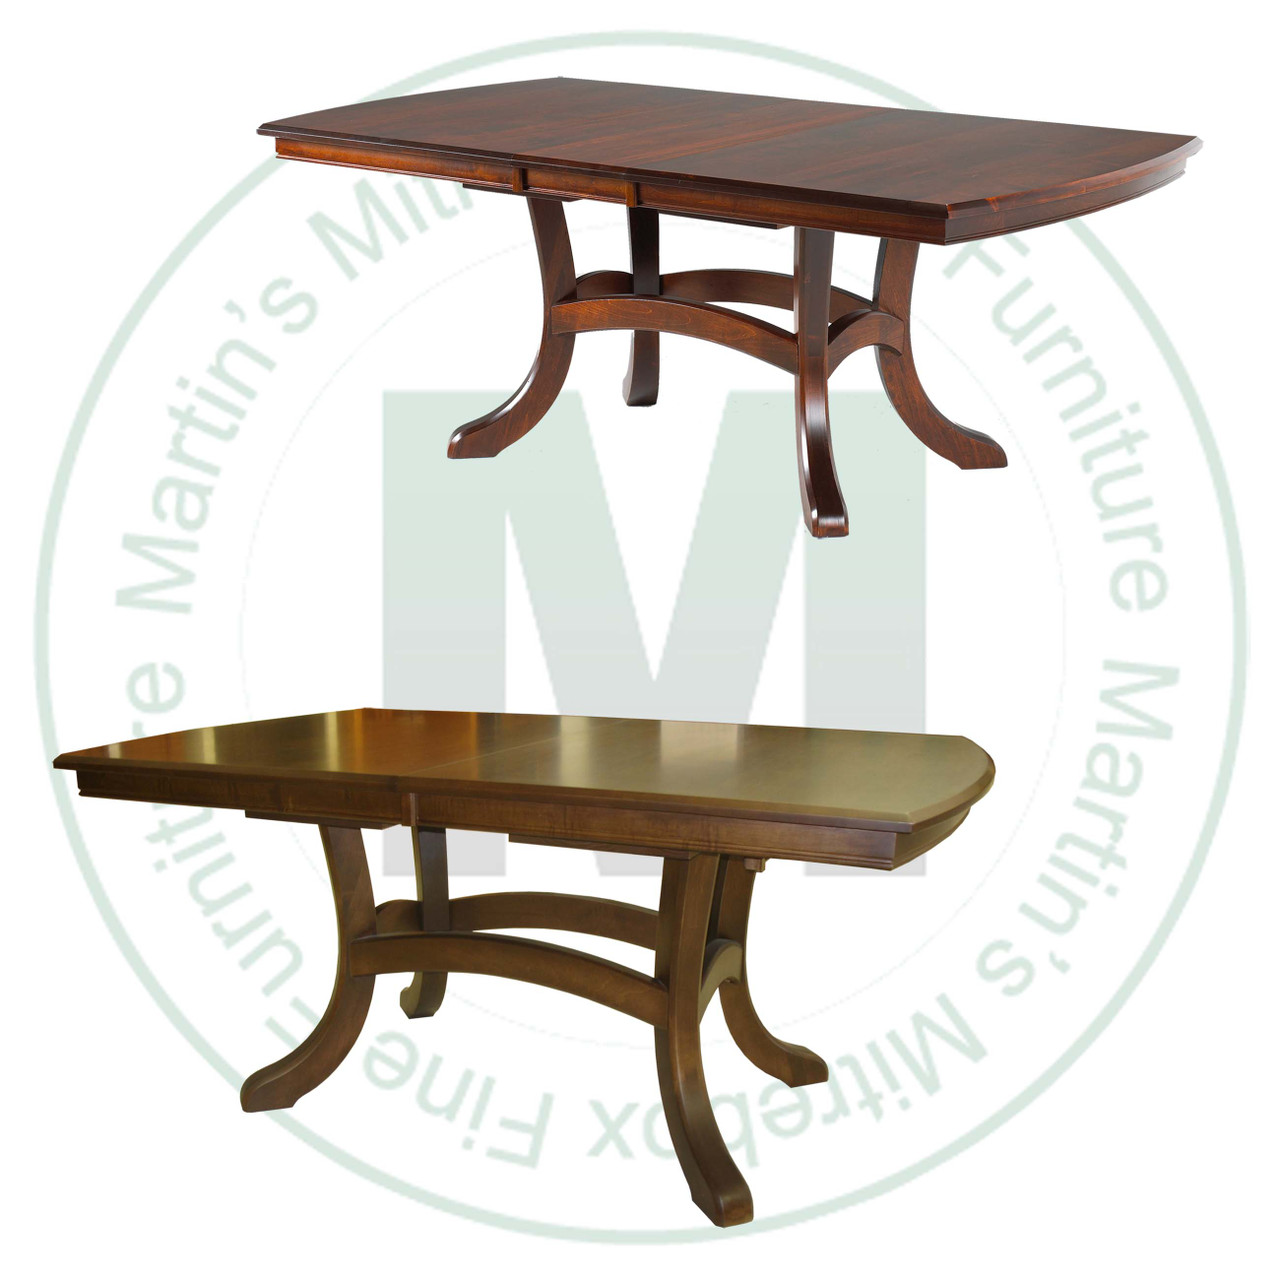 Maple Jordan Double Pedestal Table 48''D x 72''W x 30''H With 3 - 12'' Leaves. Table Has 1.25'' Thick Top